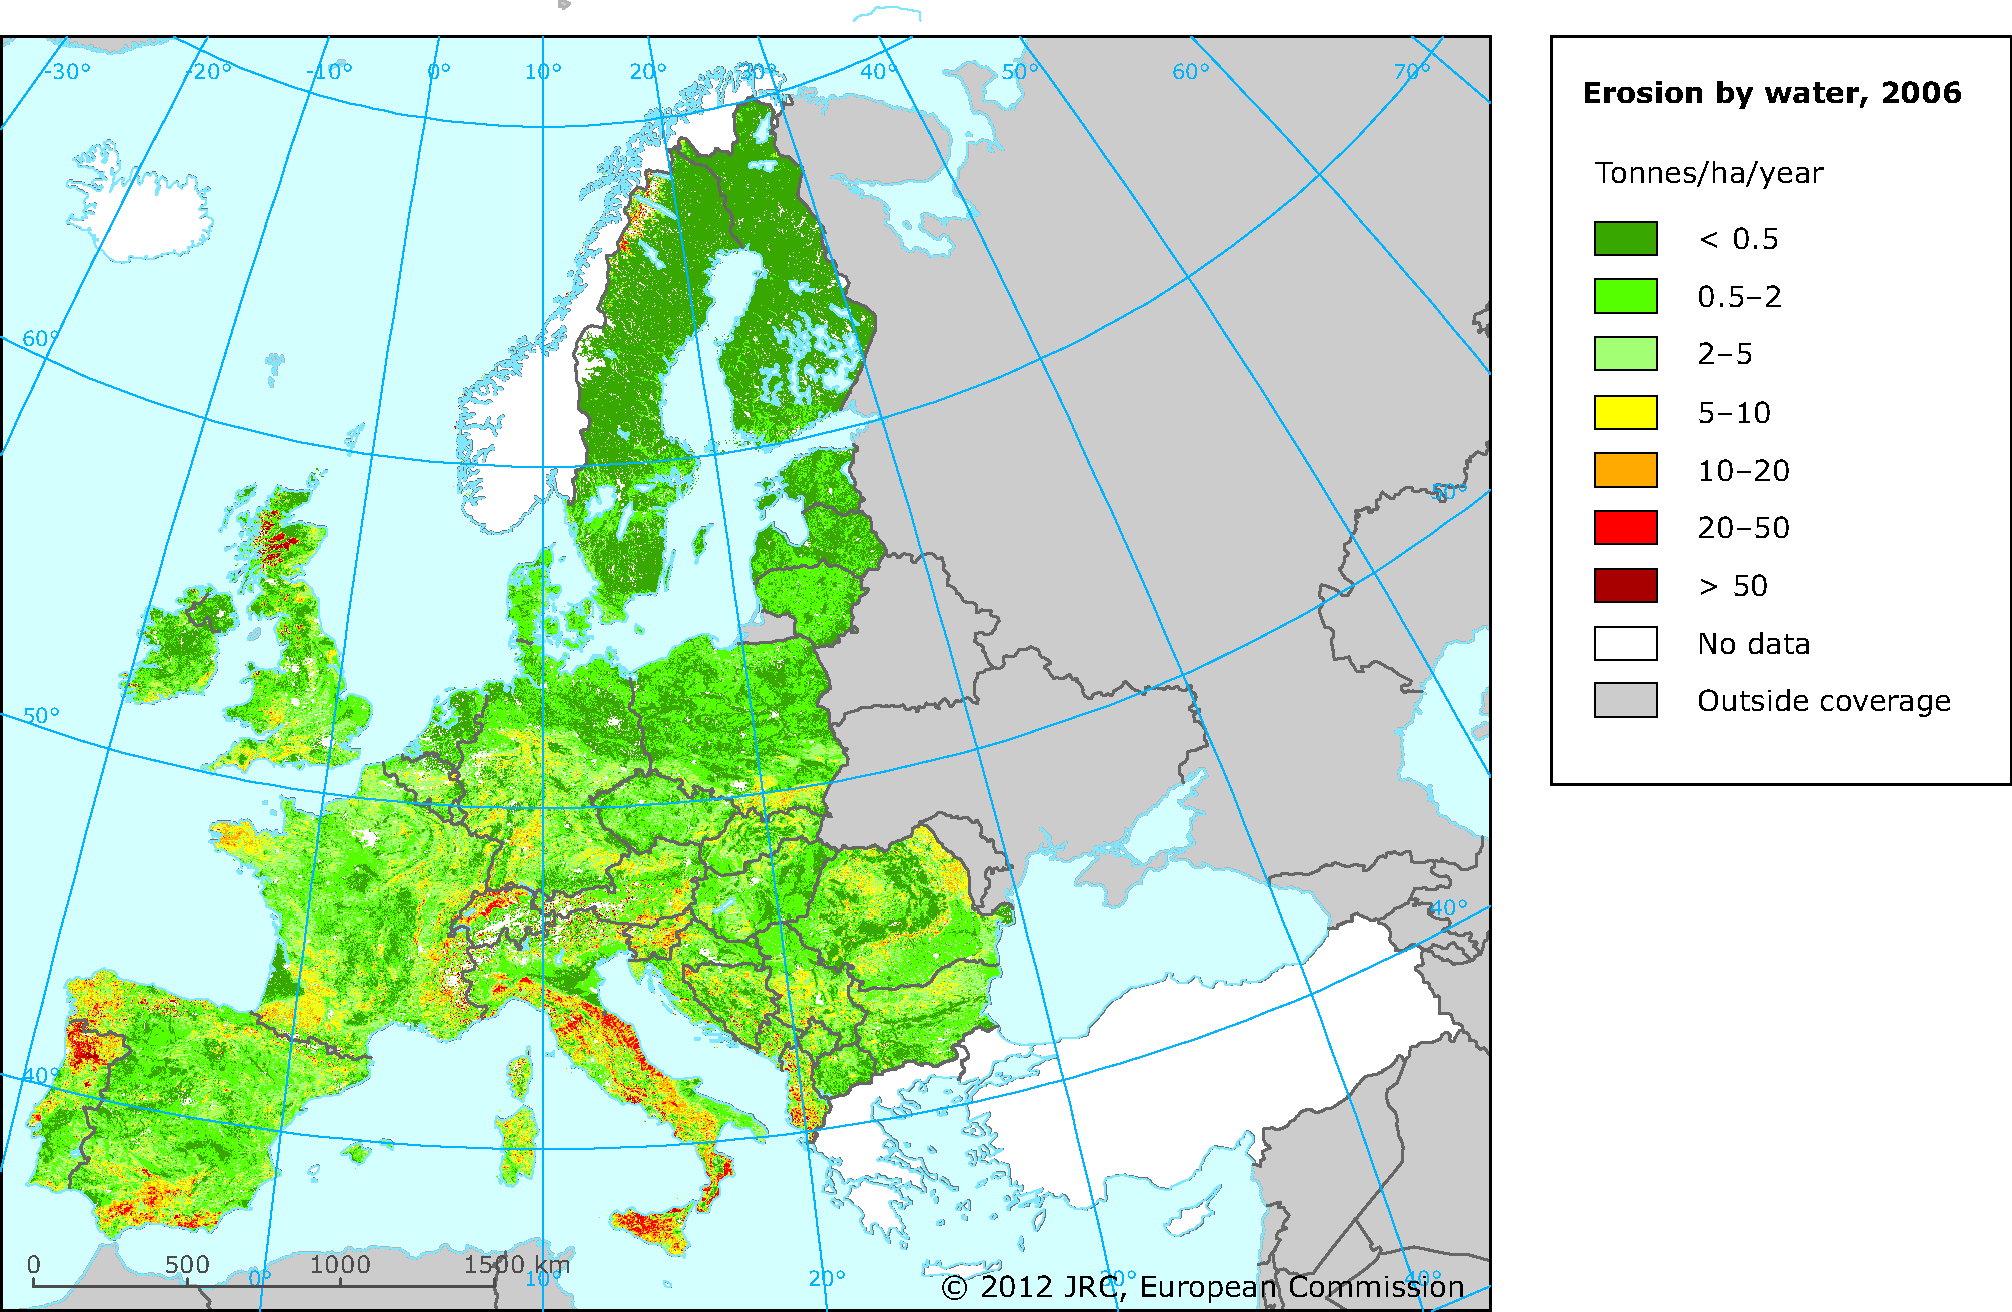 Estimated soil erosion by water in Europe